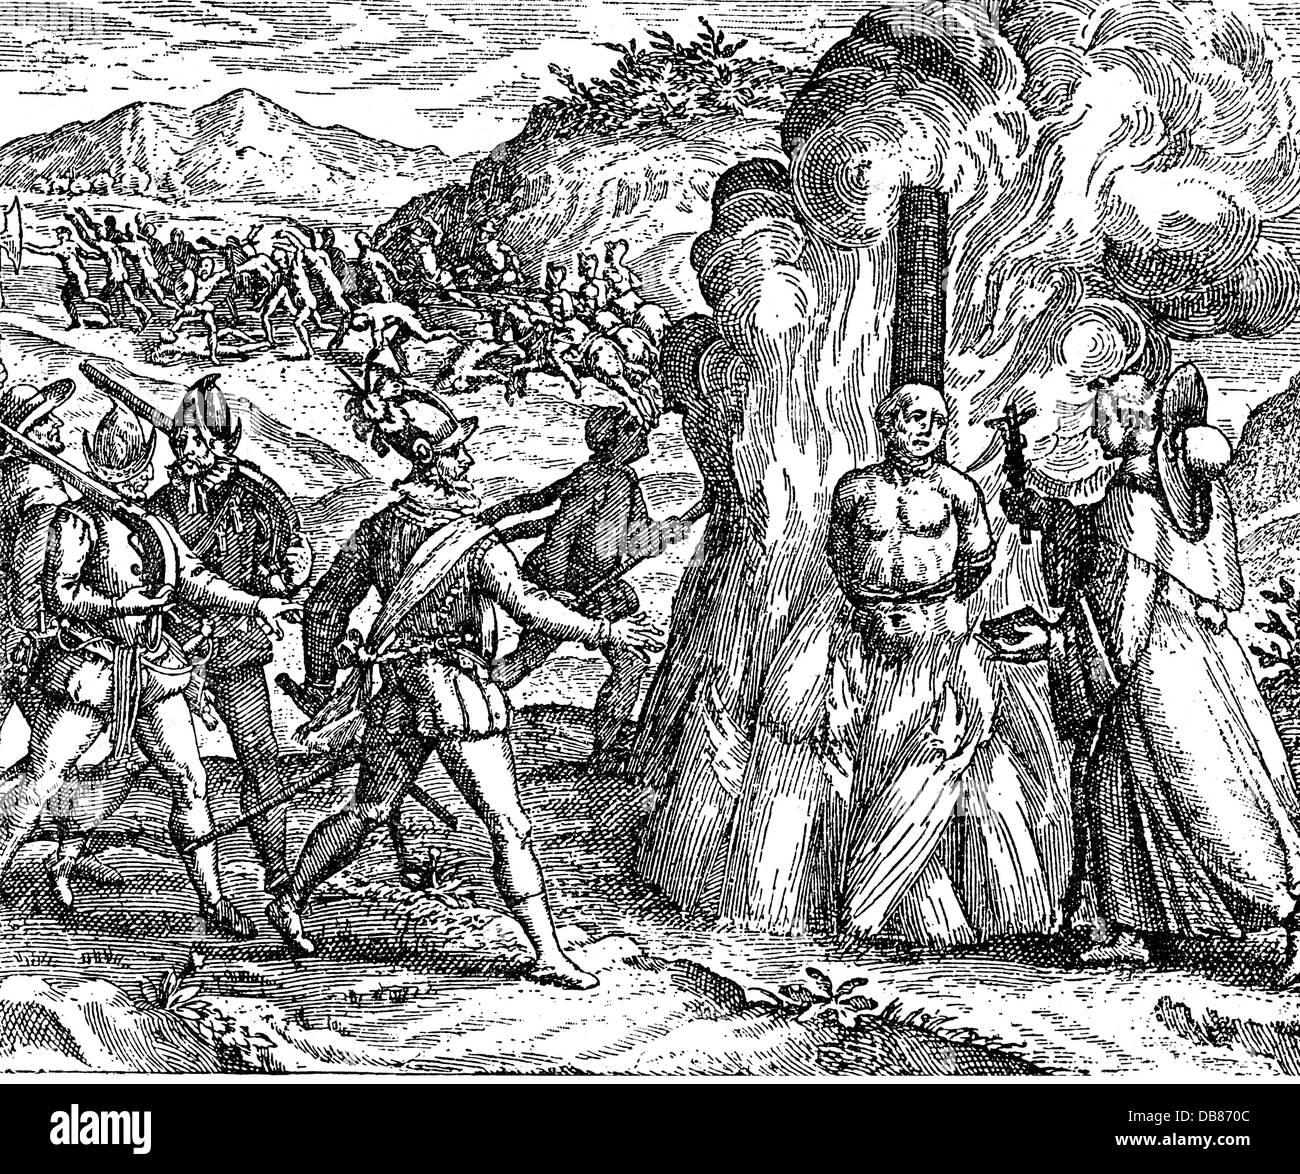 justice, inquisition, execution of a convict on the funeral pile, Cuba, after Bartolome de las Casas (1484 / 1485 - 1566), copper engraving, 16th century, 16th century, graphic, graphics, jurisdiction, court of justice, courts of justice, religion, religions, Christianity, Catholicism, heresies, heresy, heretic, convict, holy Officium, ecclesiastic justice, execution, executions, funeral pile, pyre, stake, burning up, South America, Caribbean, the Caribbean Sea, Conquista, conquistador, conquistadores, conquistadors, death by fire, burning, burnings, d, Artist's Copyright has not to be cleared Stock Photo